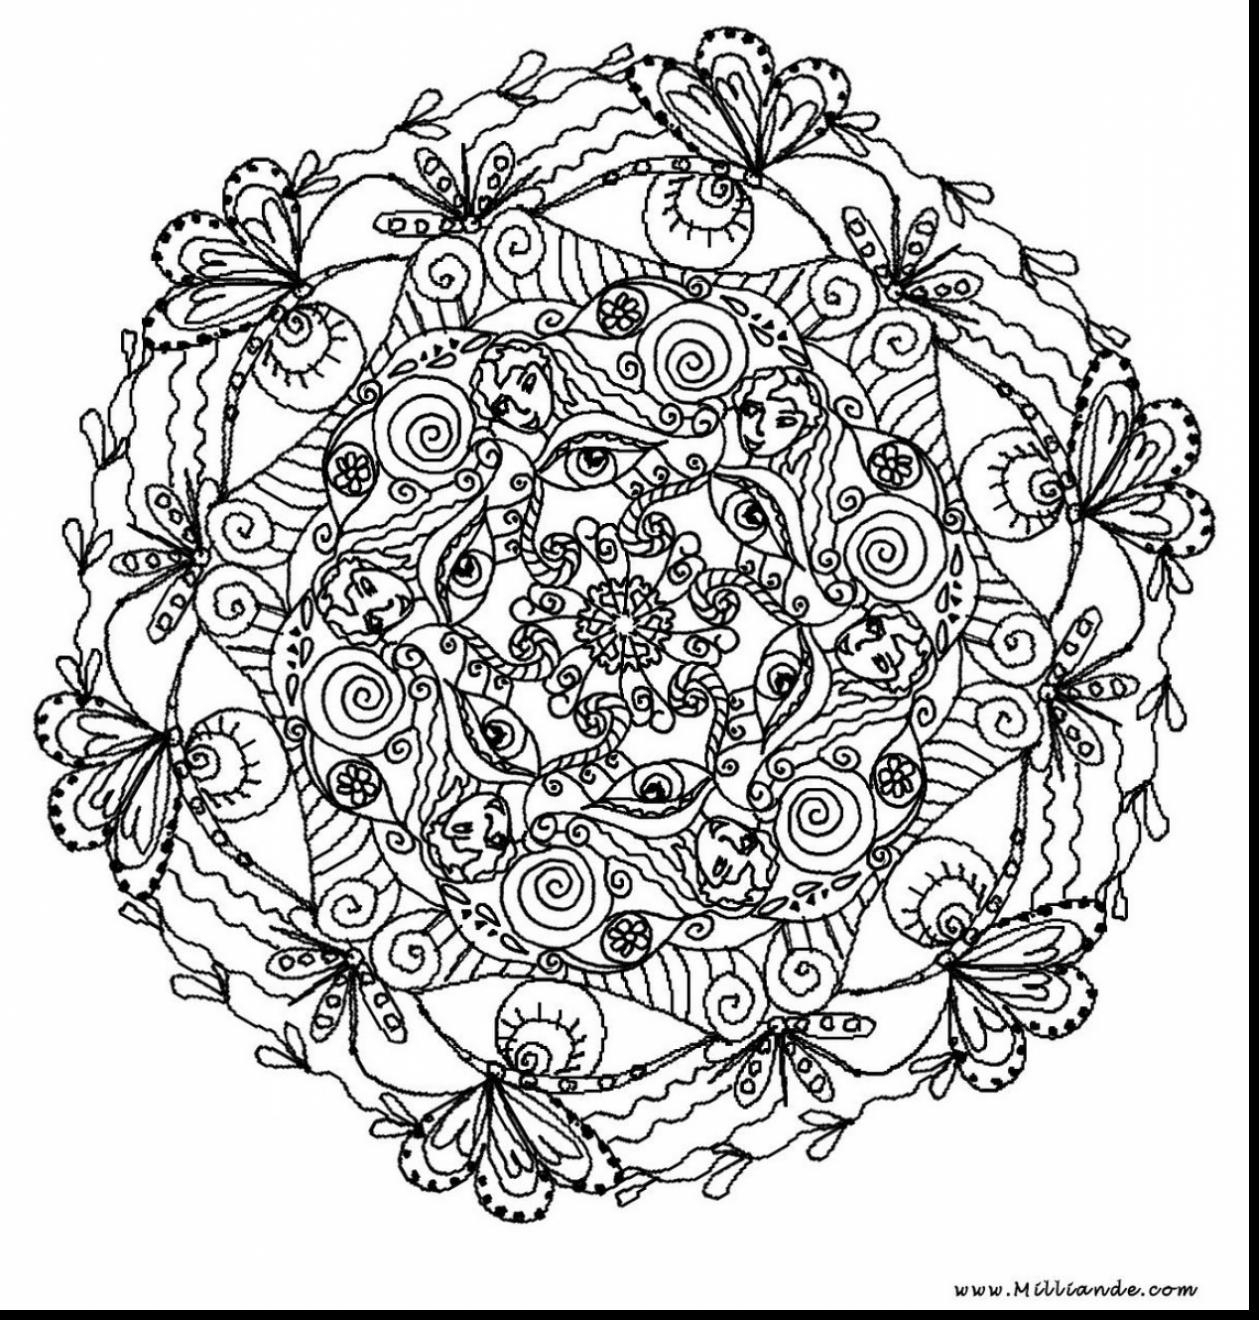 Fresh Magnificent Printable Mandala Coloring Pages Adults With Hard - Free Printable Mandala Coloring Pages For Adults